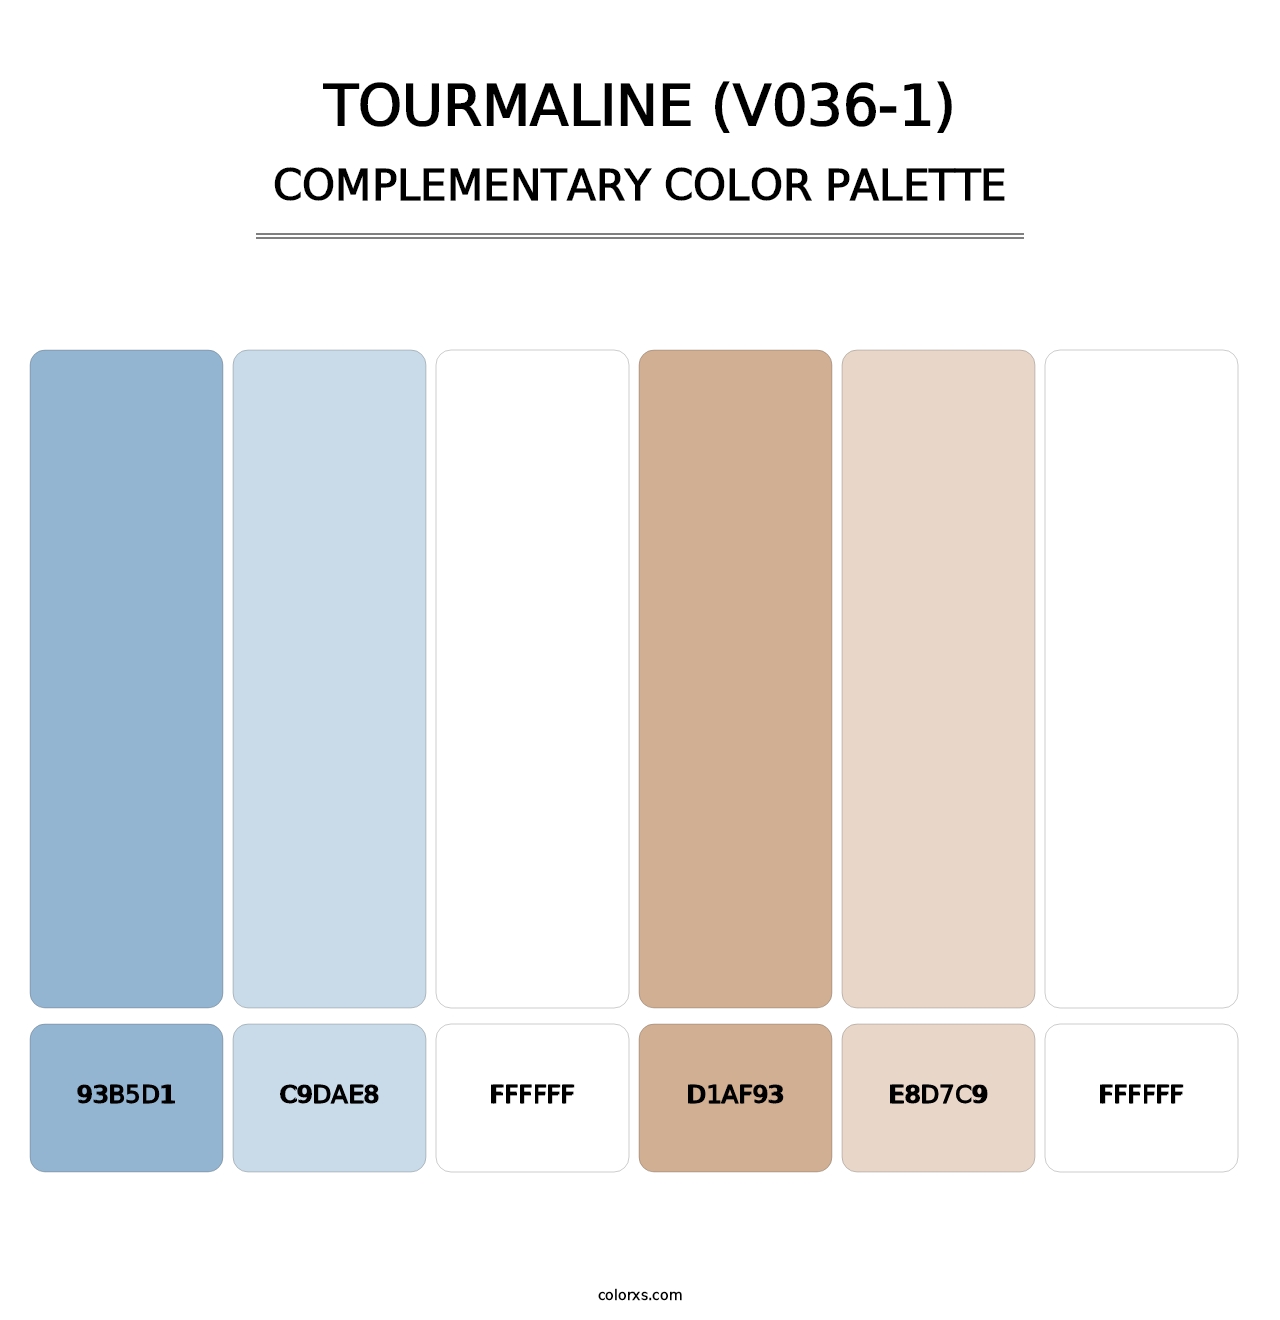 Tourmaline (V036-1) - Complementary Color Palette